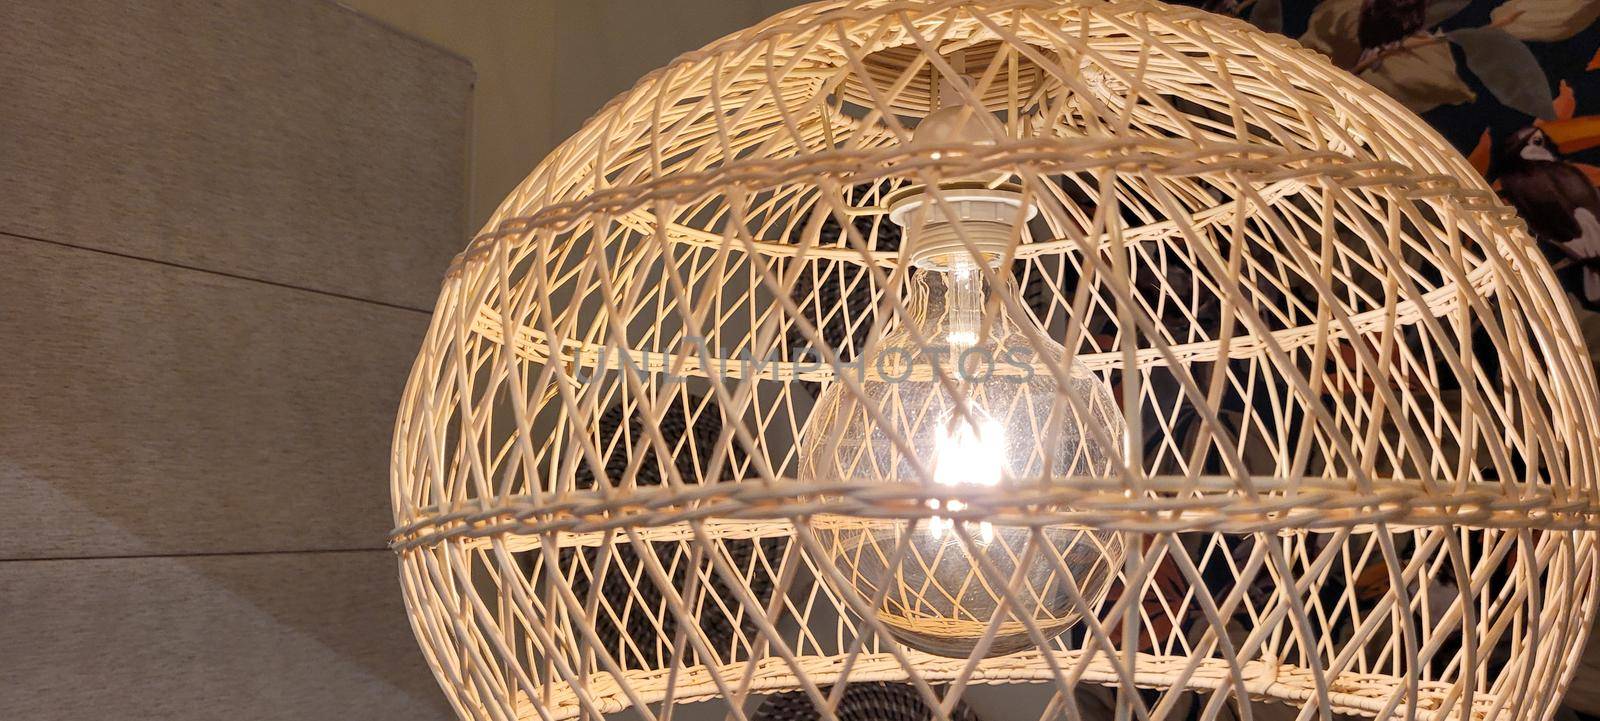 filament lamp lighting with rustic straw screen finish made by hand, straw chandelier